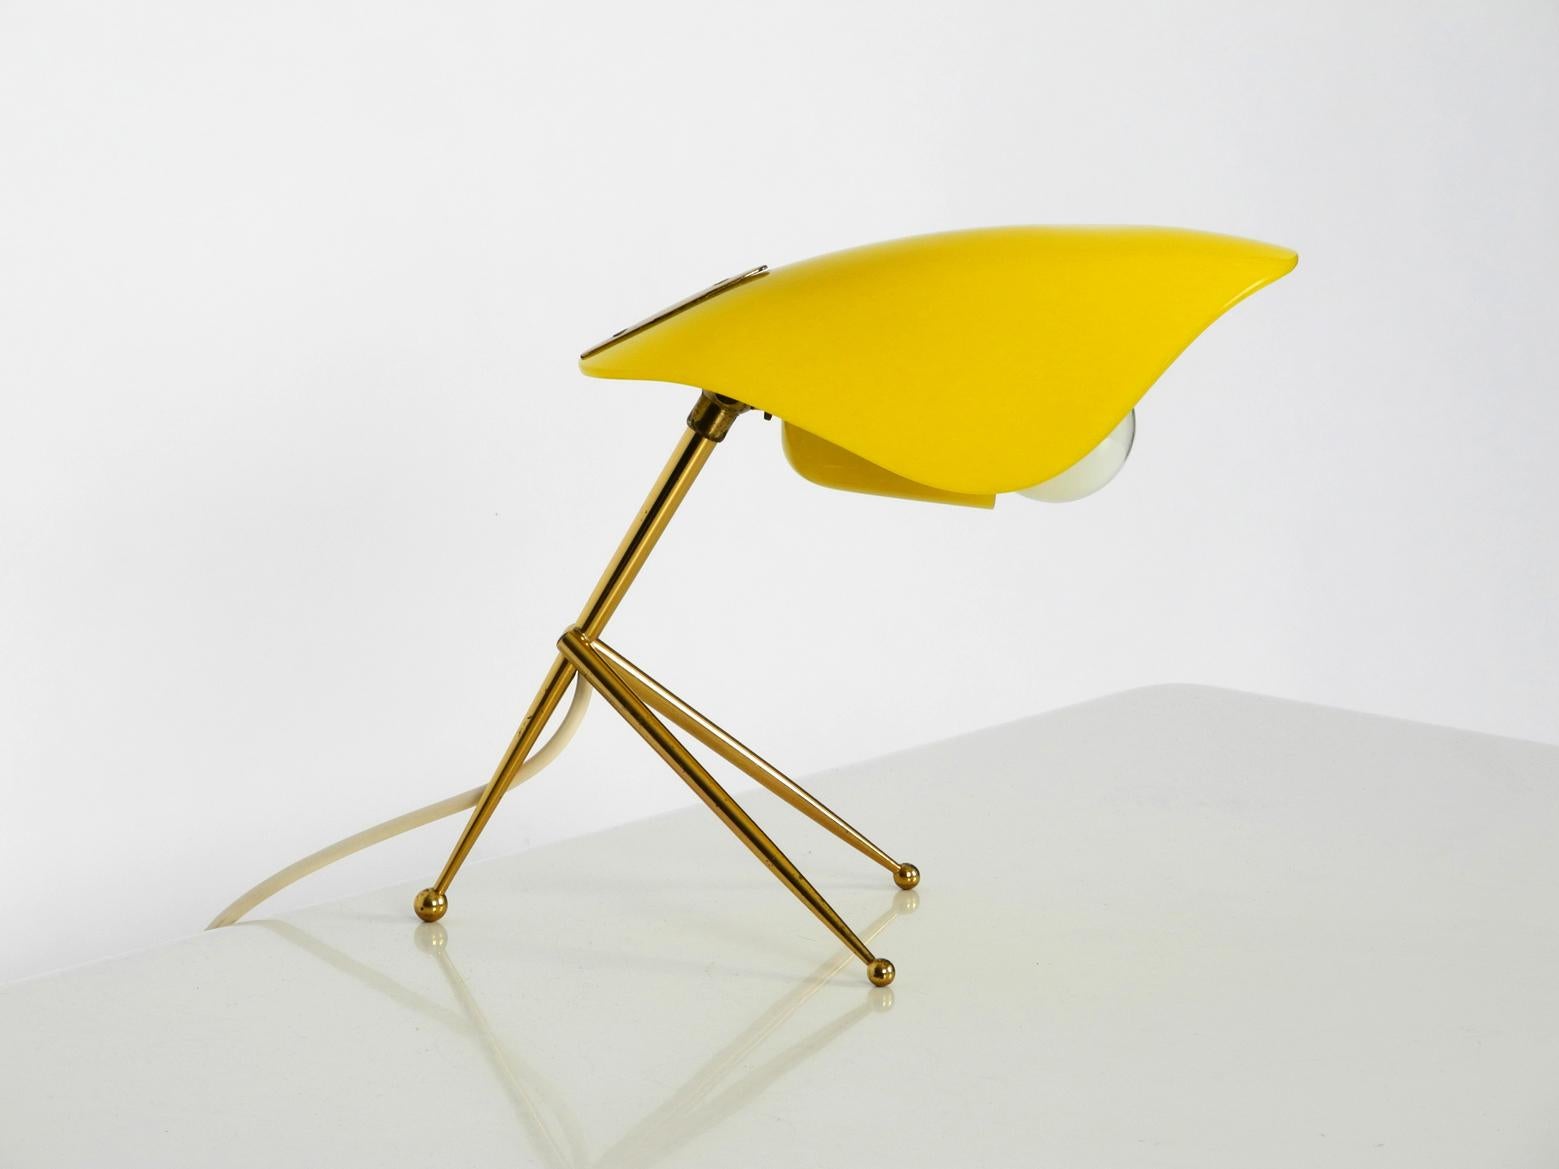 Rare midcentury table lamp with yellow acrylic glass lampshade and brass tripod frame.
Beautiful 50s style in very good vintage condition.
100% original condition and fully functional.
Makes a gorgeous yellow light.
One E14 socket for max. 25